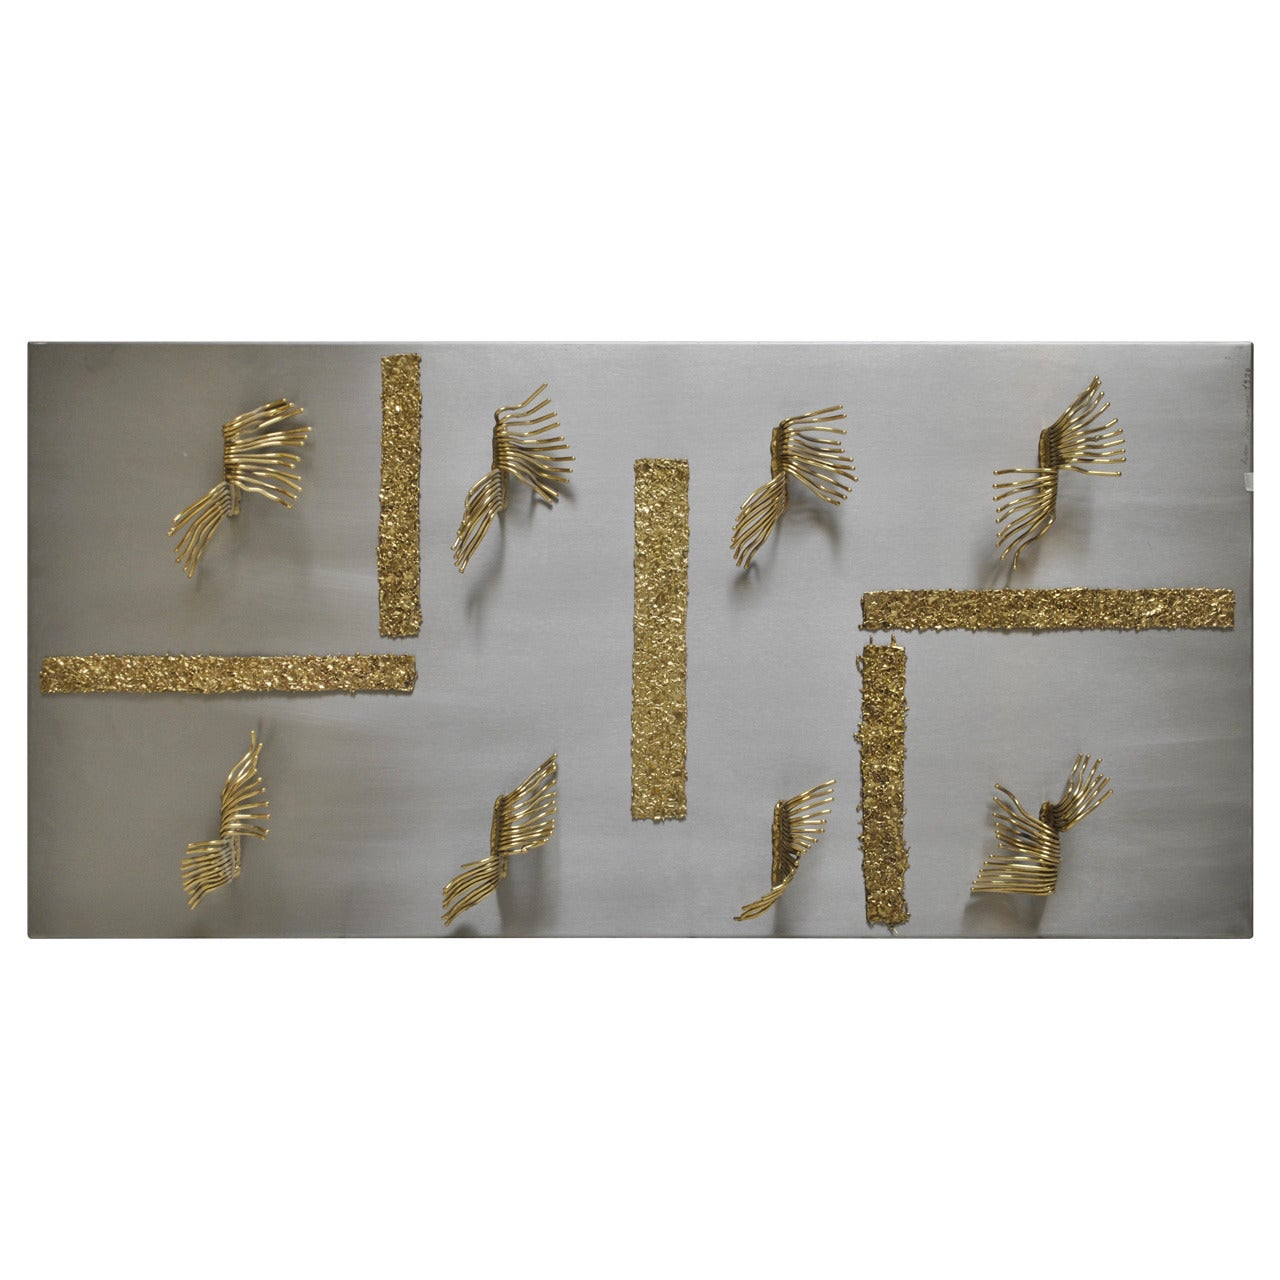 Steel and Brass Wall Sculpture "Orphée", the Henri Fernandez Private Collection For Sale